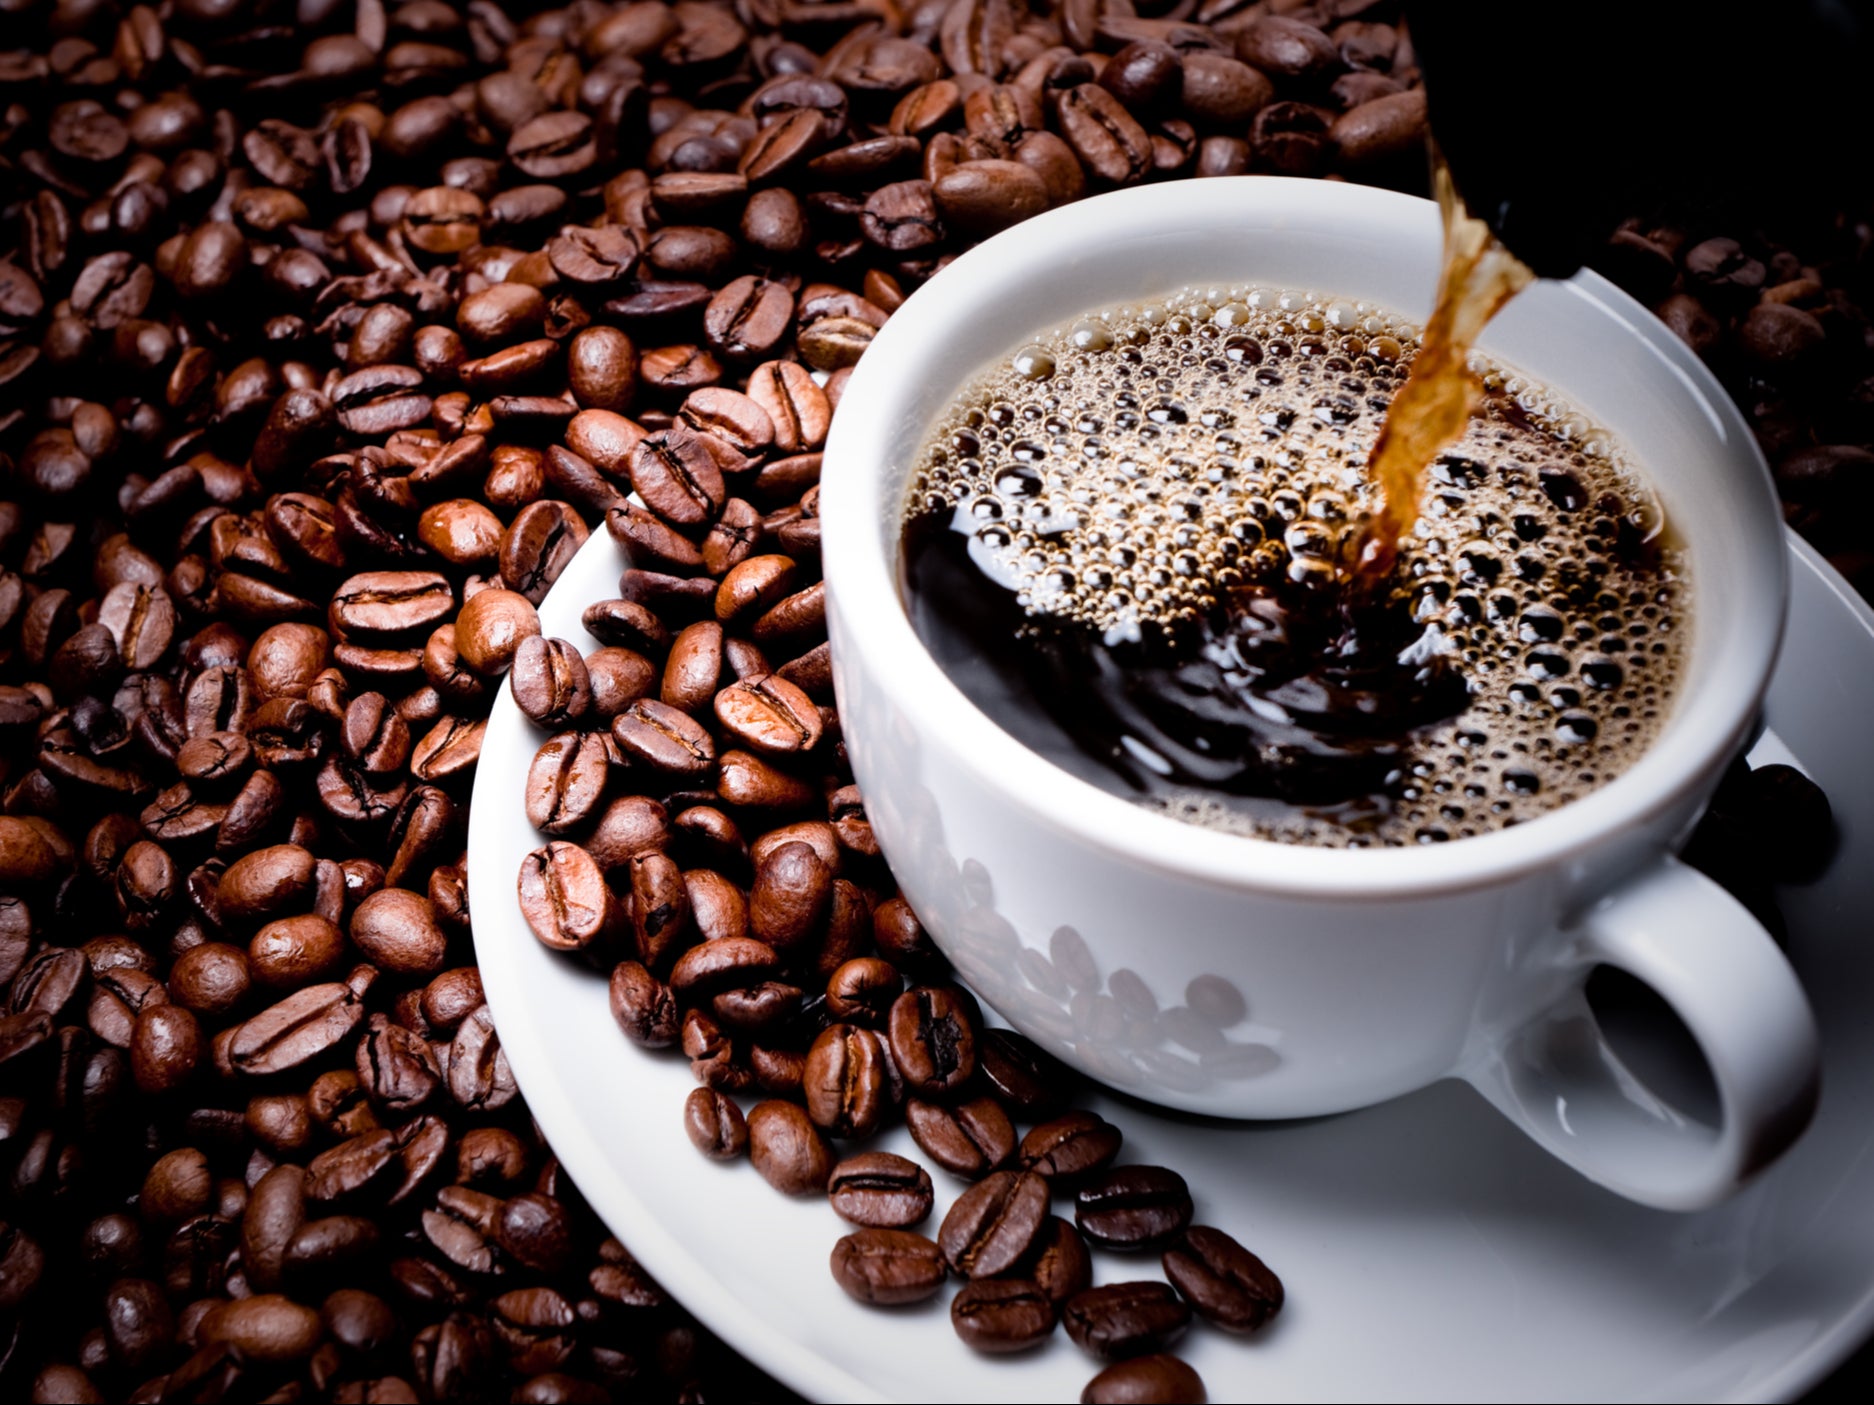 Regularly drinking caffeinated coffee has been linked with better heart health